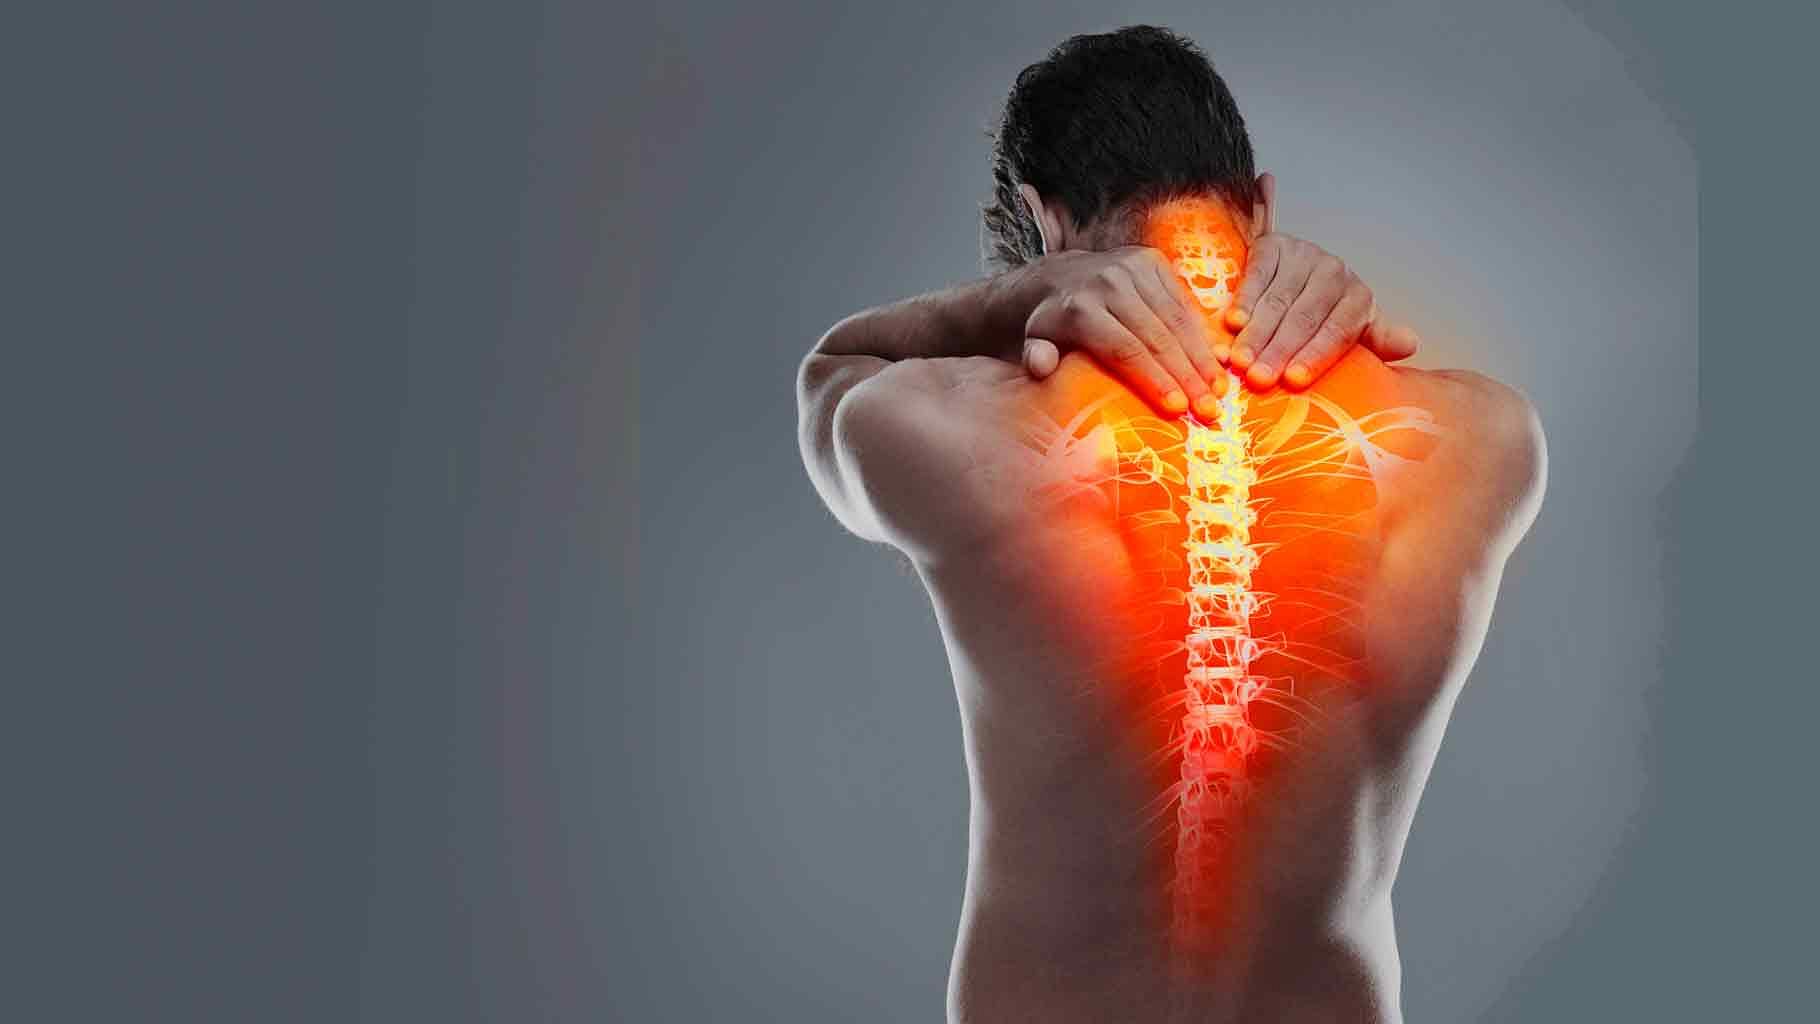 Running up and down the spine, the paraspinal muscles play a key role in spinal movement and posture.